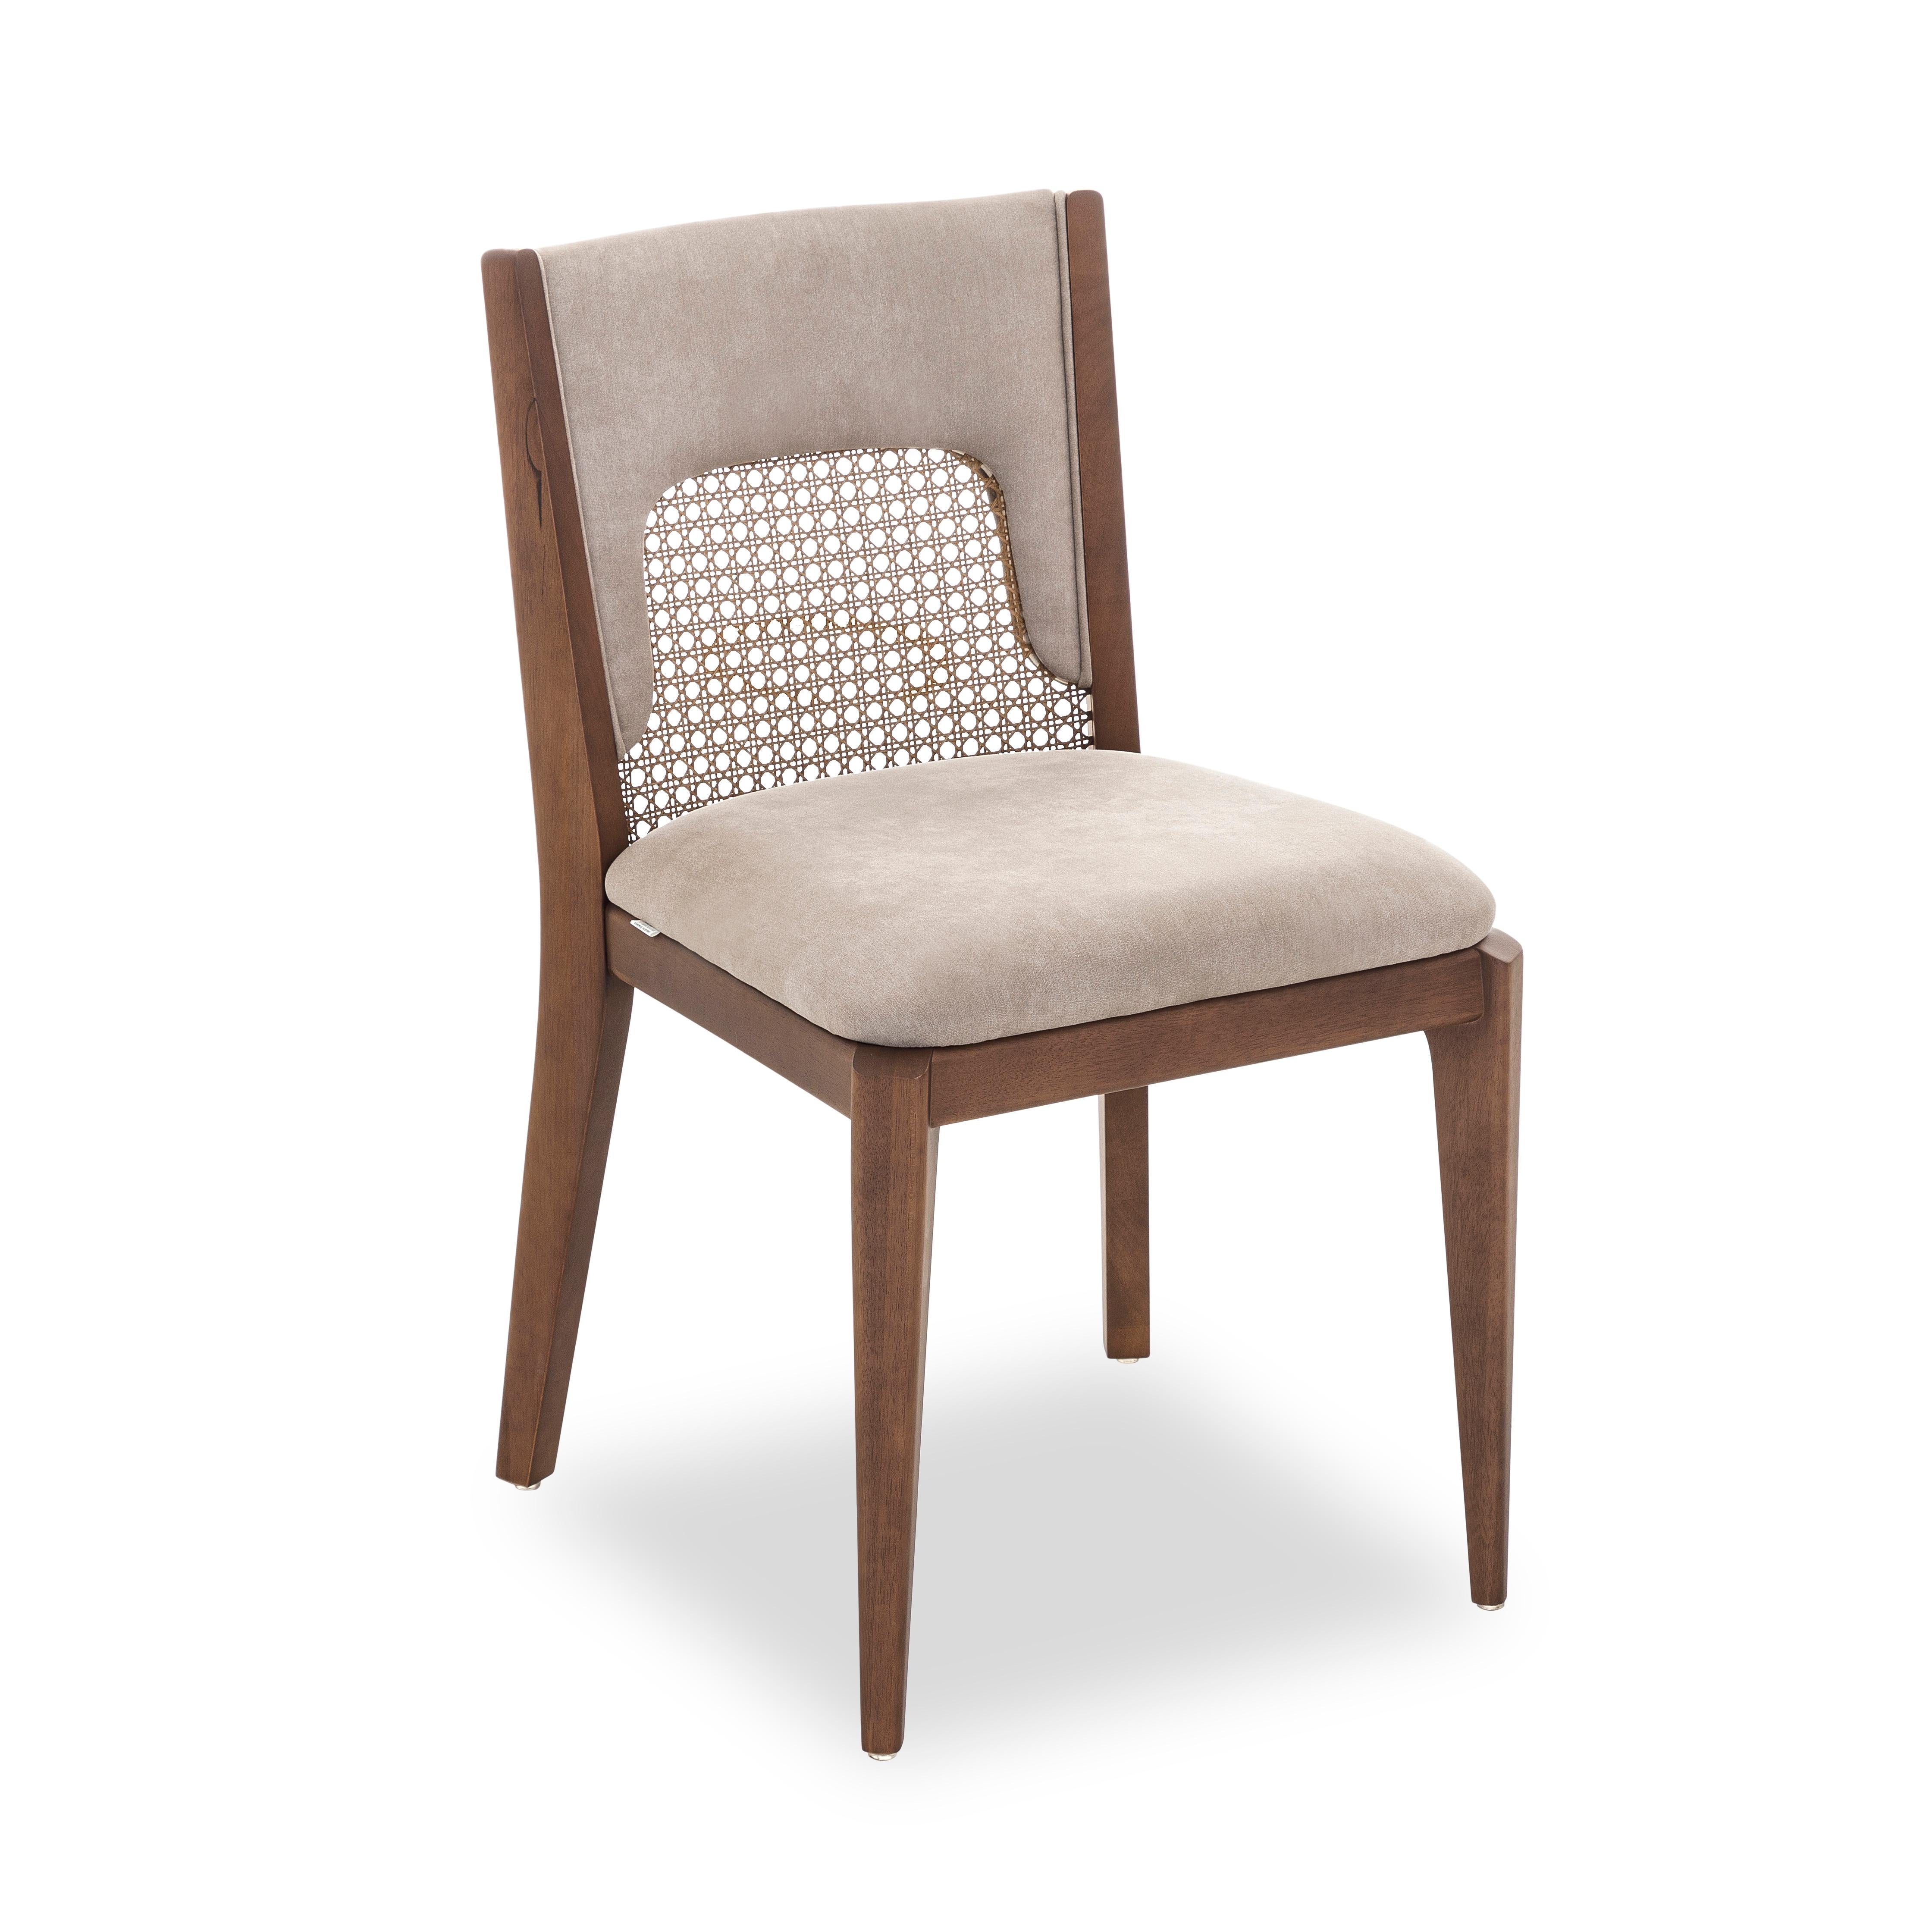 Brazilian Zani Dining Chair in Light Brown Upholstery and Walnut Wood Finish, Set of 2 For Sale